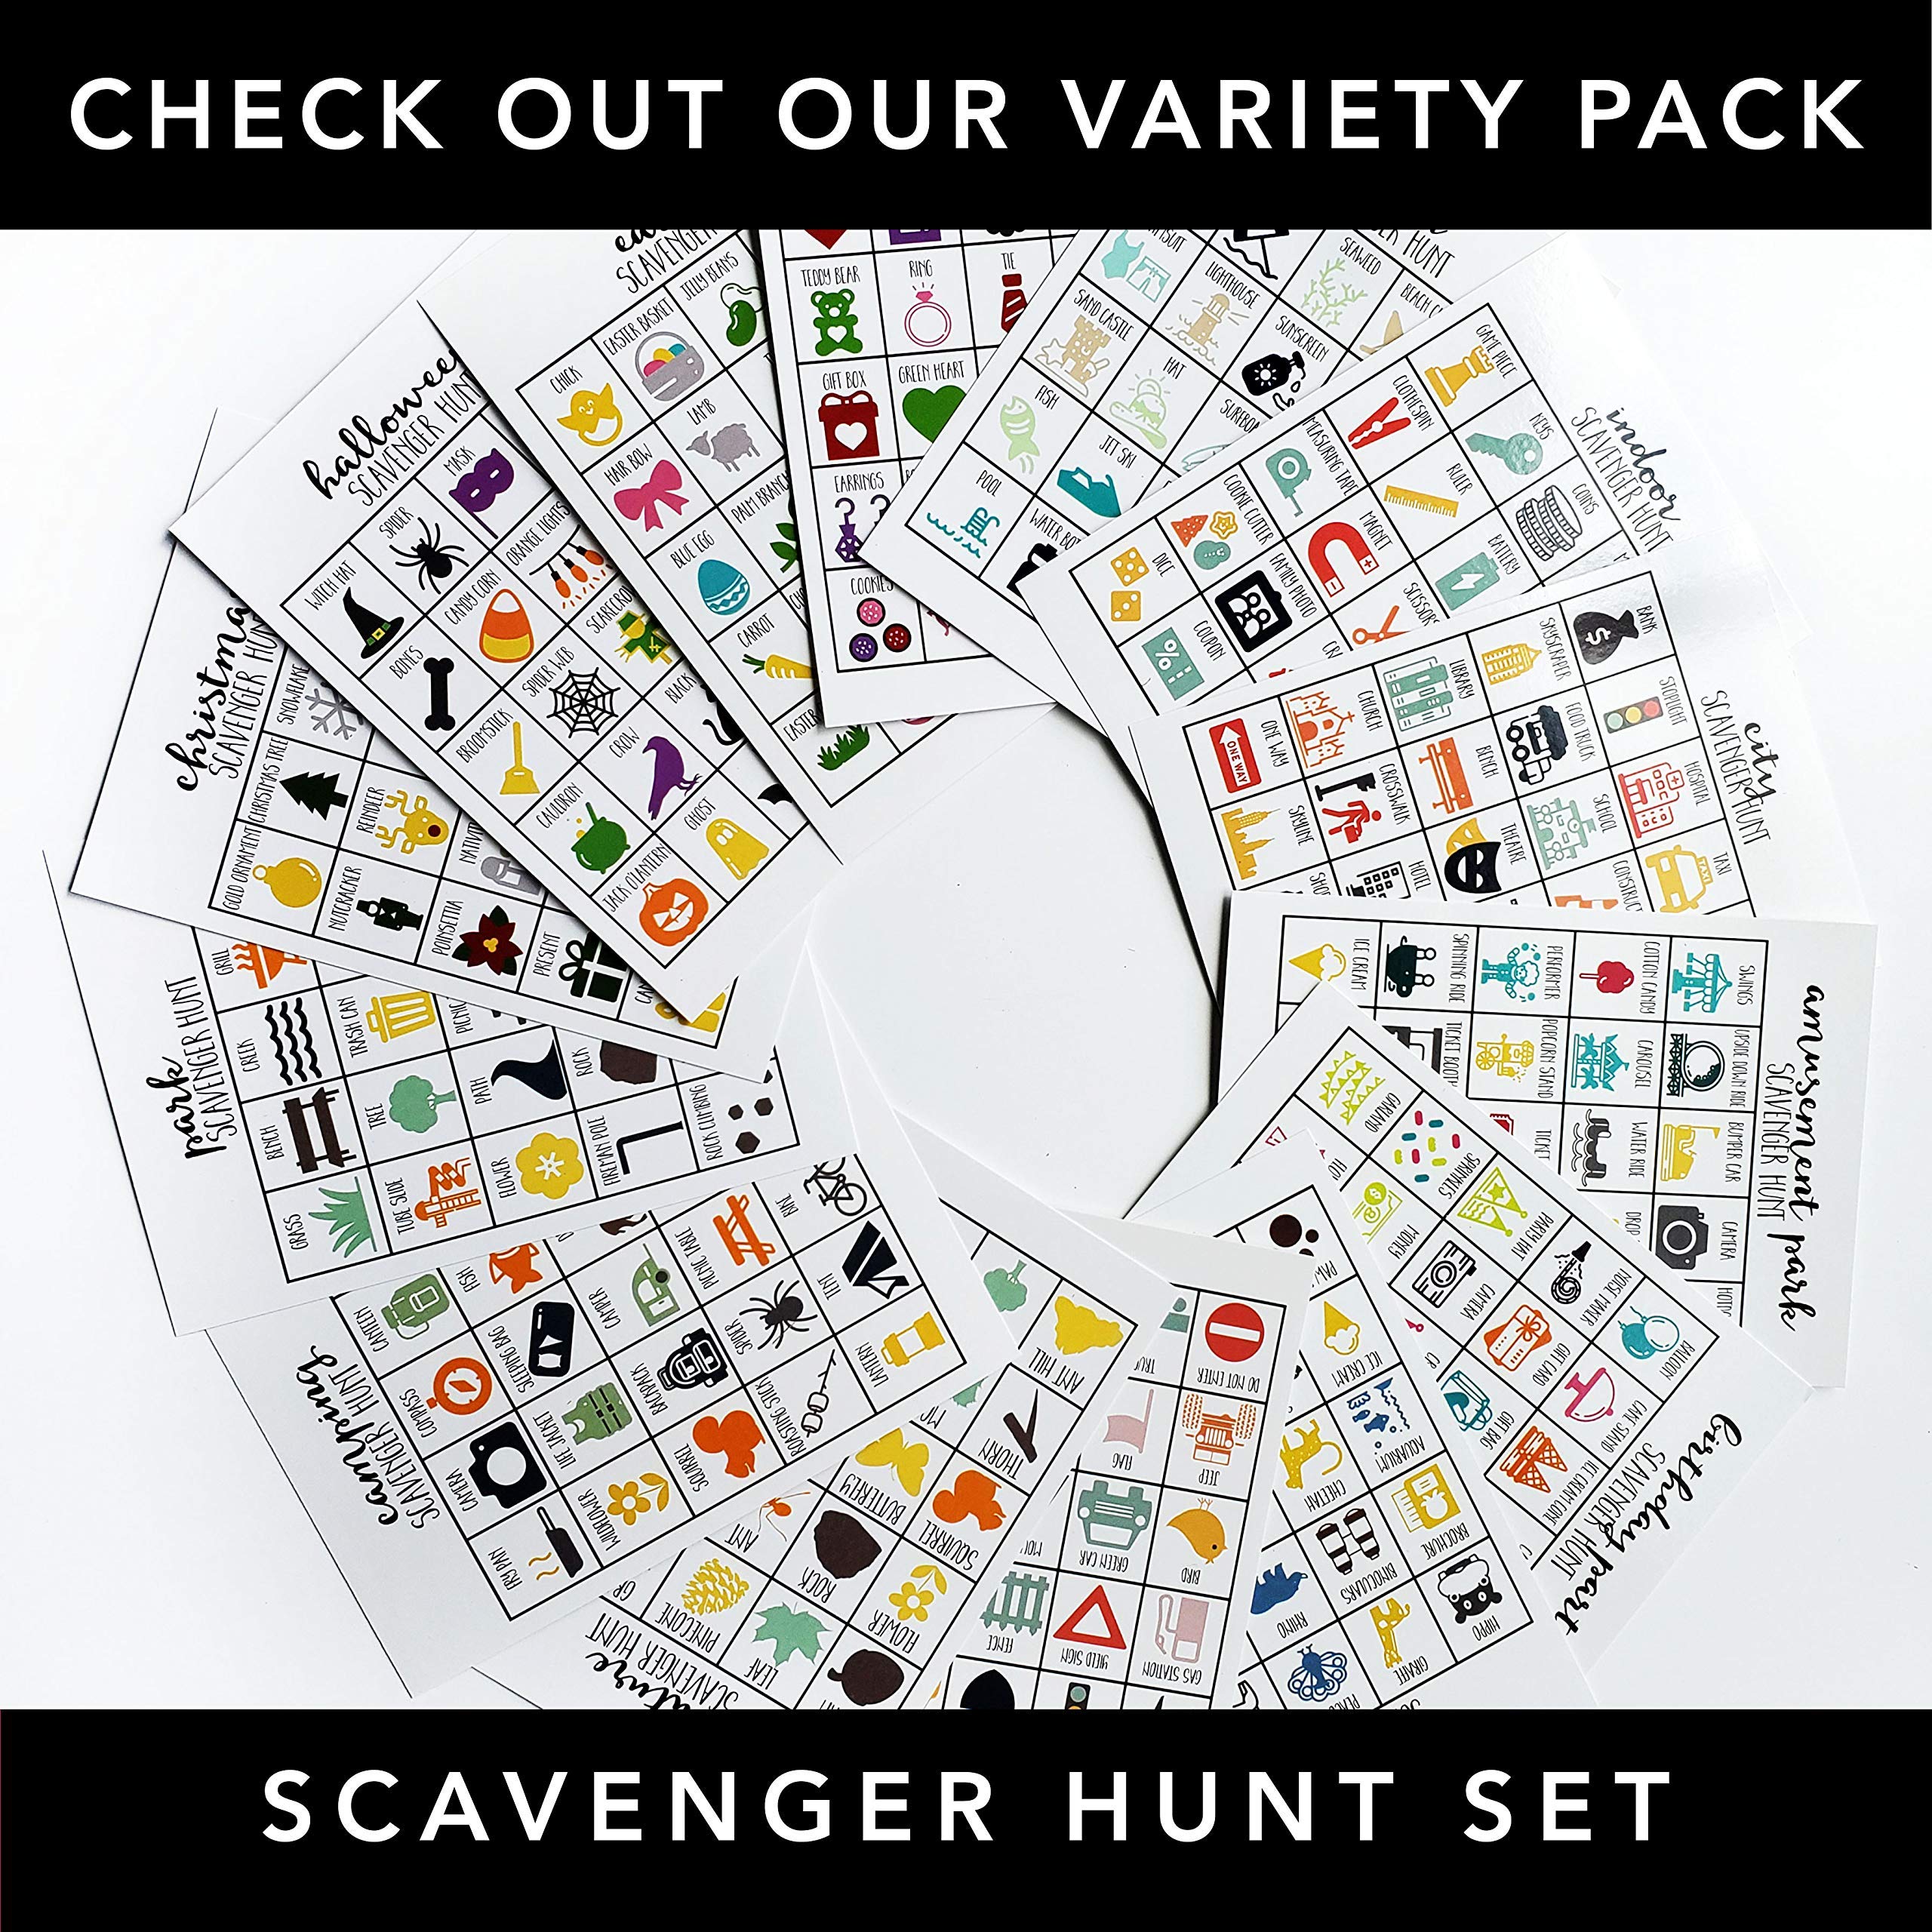 Set of 10 Nature Scavenger Hunt, Nature Party Game, Outdoor Game, Dry Erase (10 markers included)